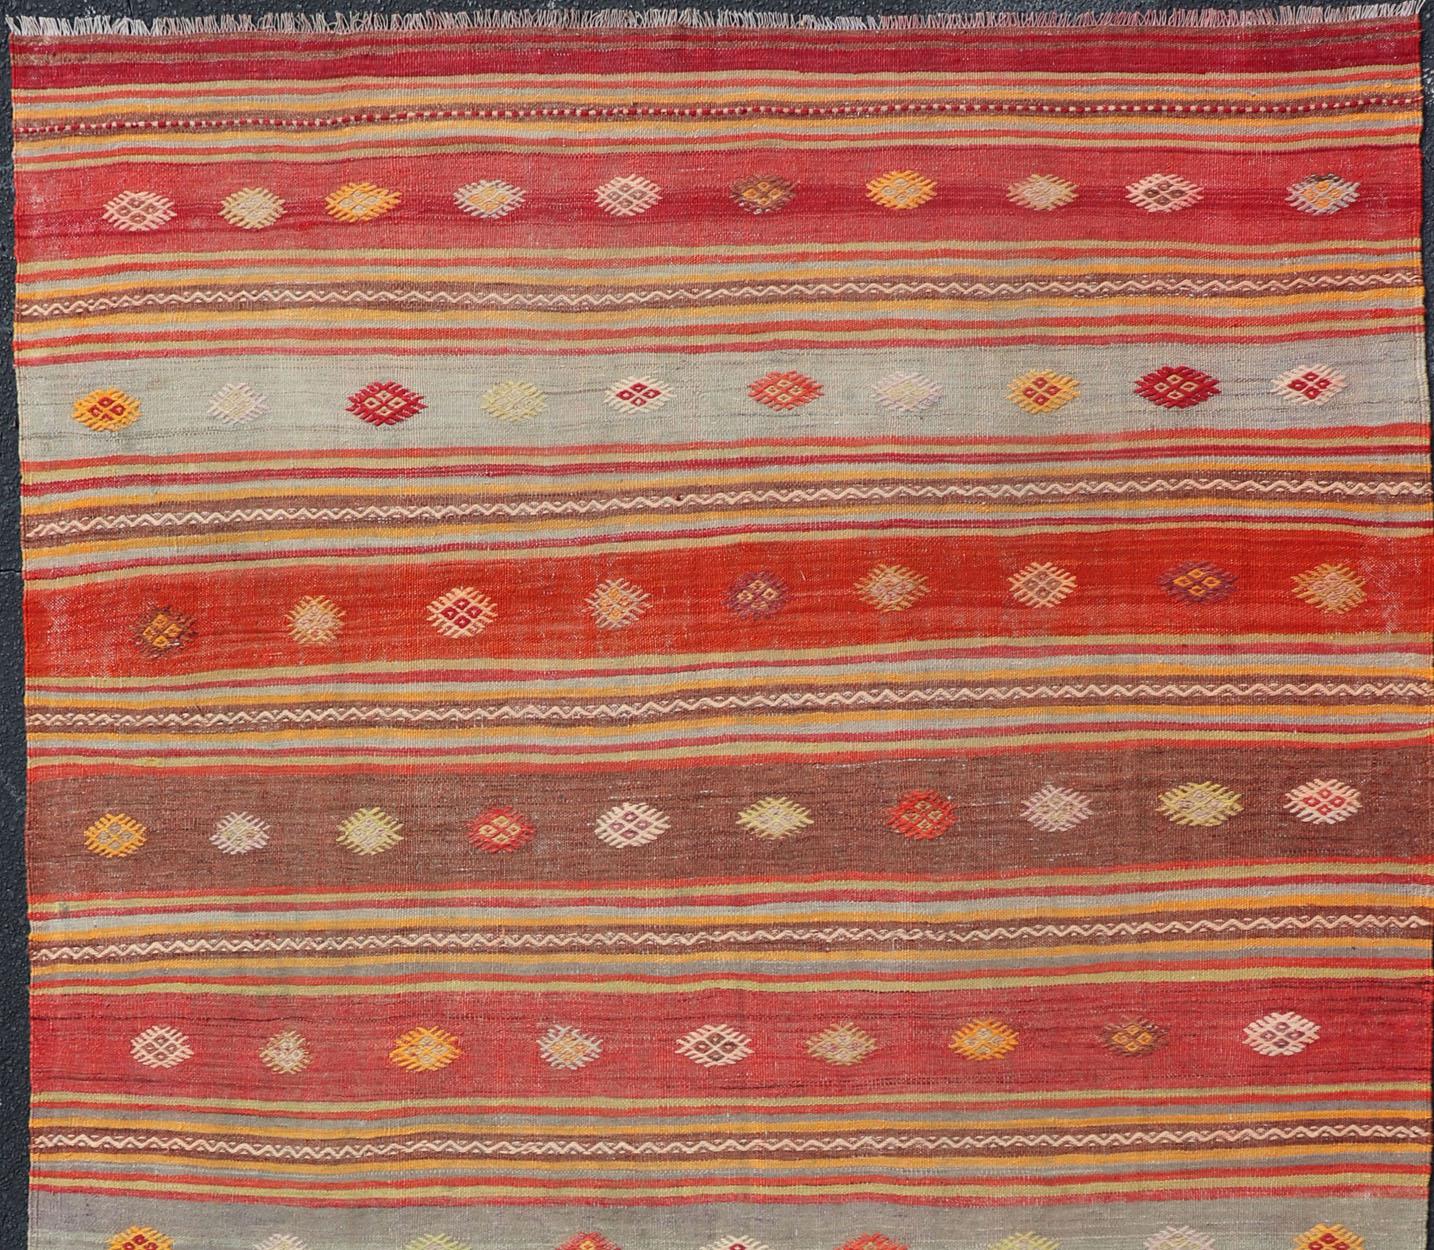 Colorful Vintage Turkish Embroidered Kilim with Stripes and Geometric Motifs. Keivan Woven Arts / rug EN-178880, country of origin / type: Turkey / Kilim, circa 1940

This vintage Turkish flat-woven Kilim features a minimalist design rendered in